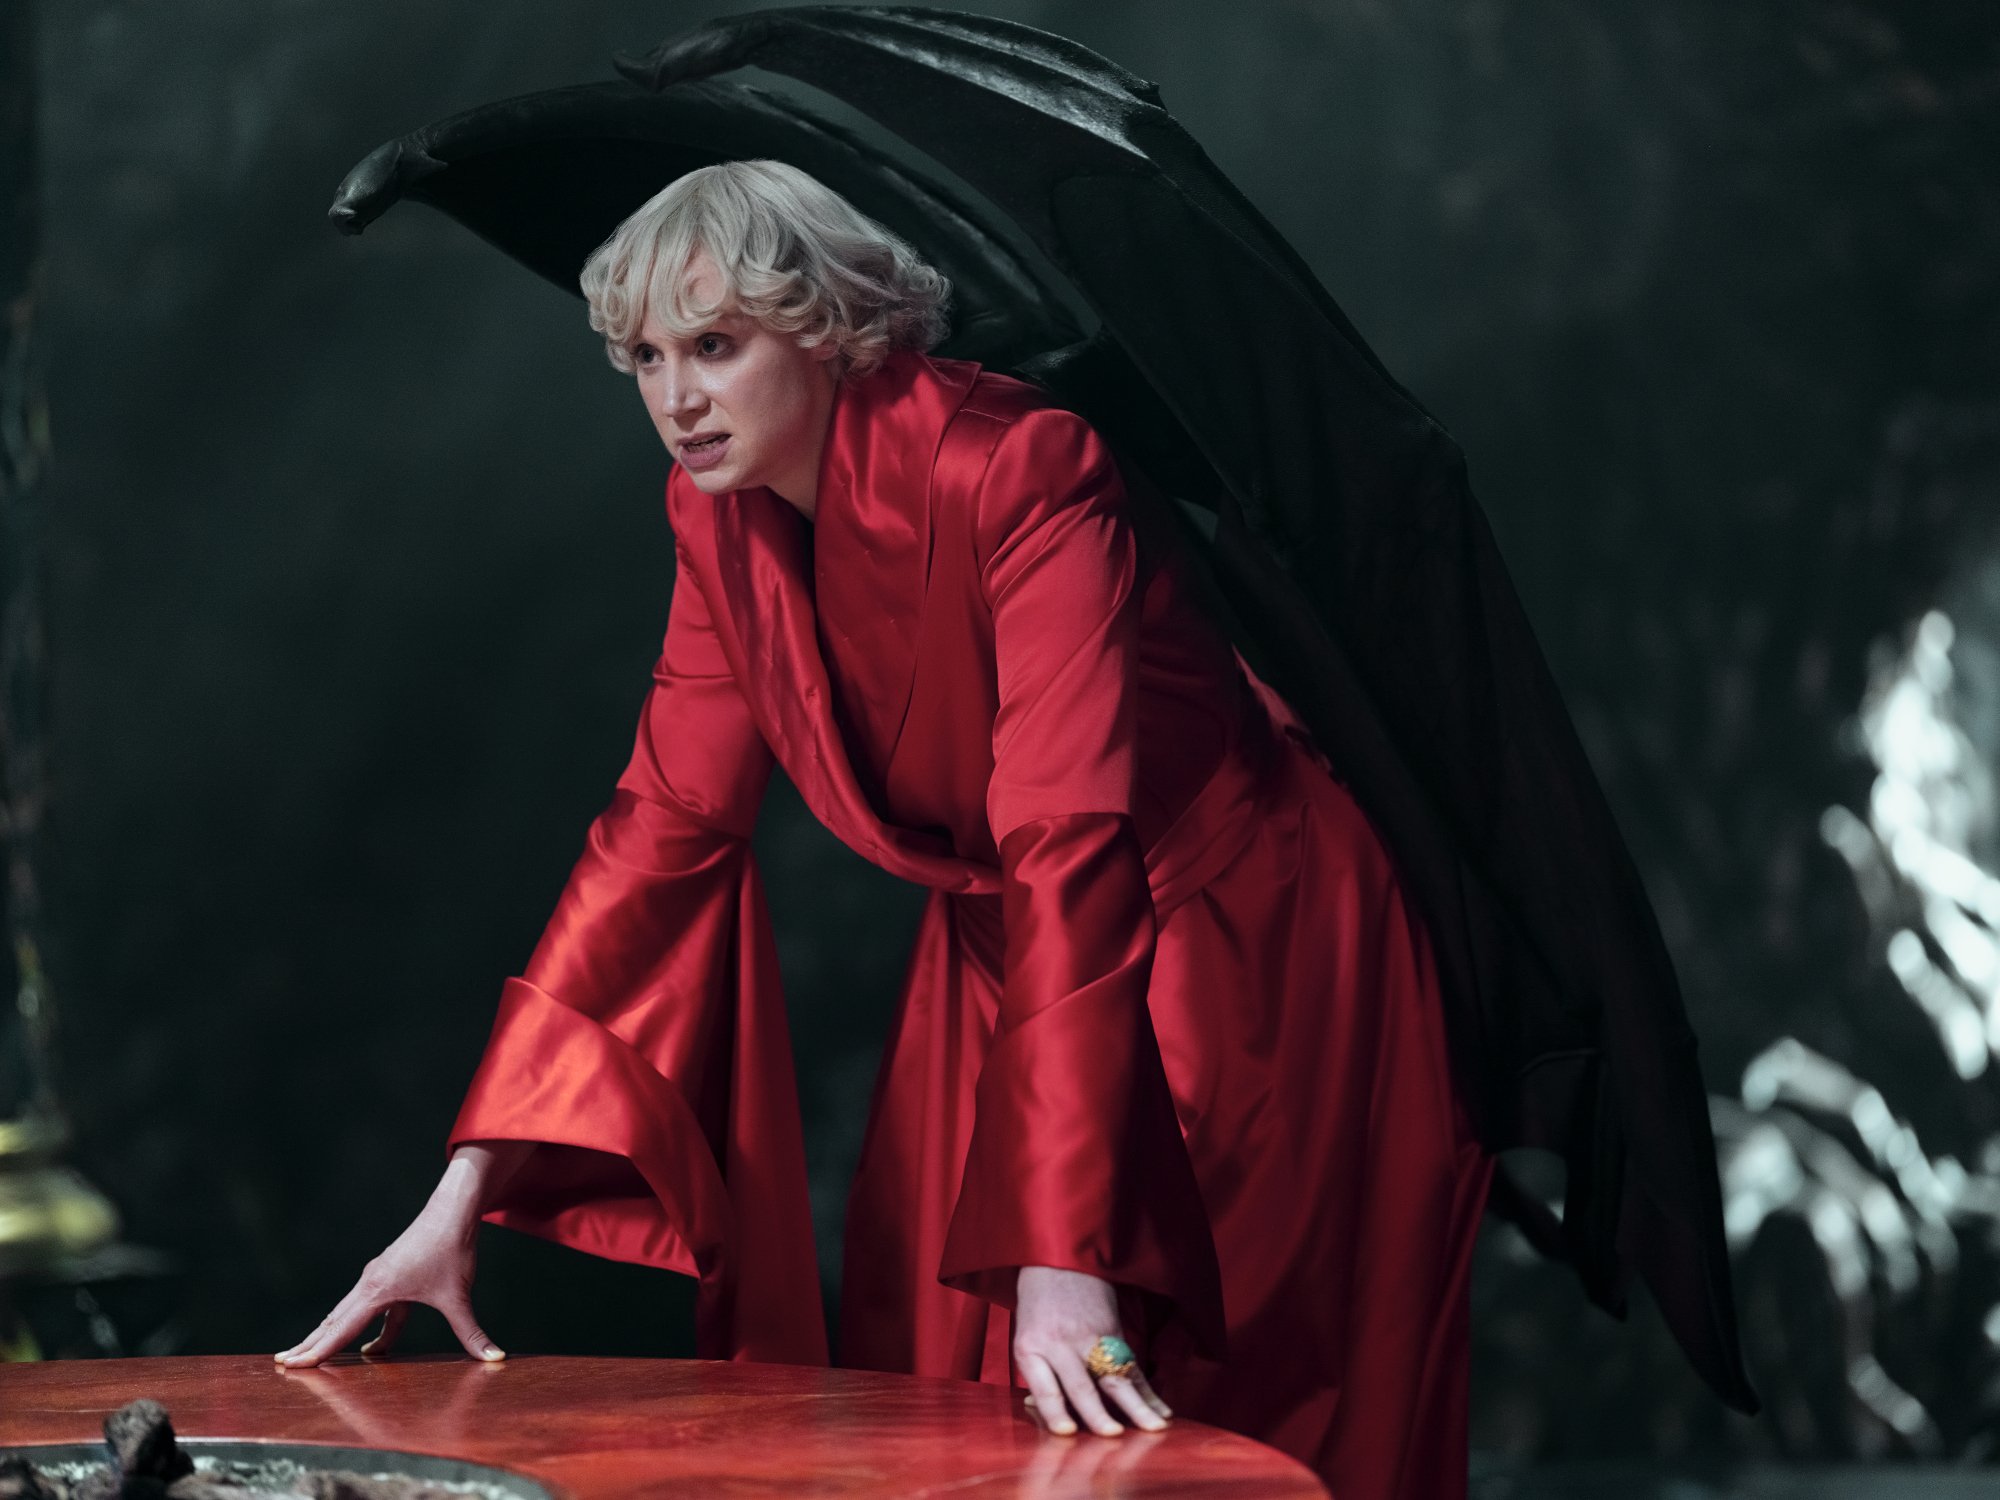 'The Sandman' cast member Gwendoline Christie as Lucifer Morningstar. She's wearing a red outfit, has black wings, and is leaning over a table.